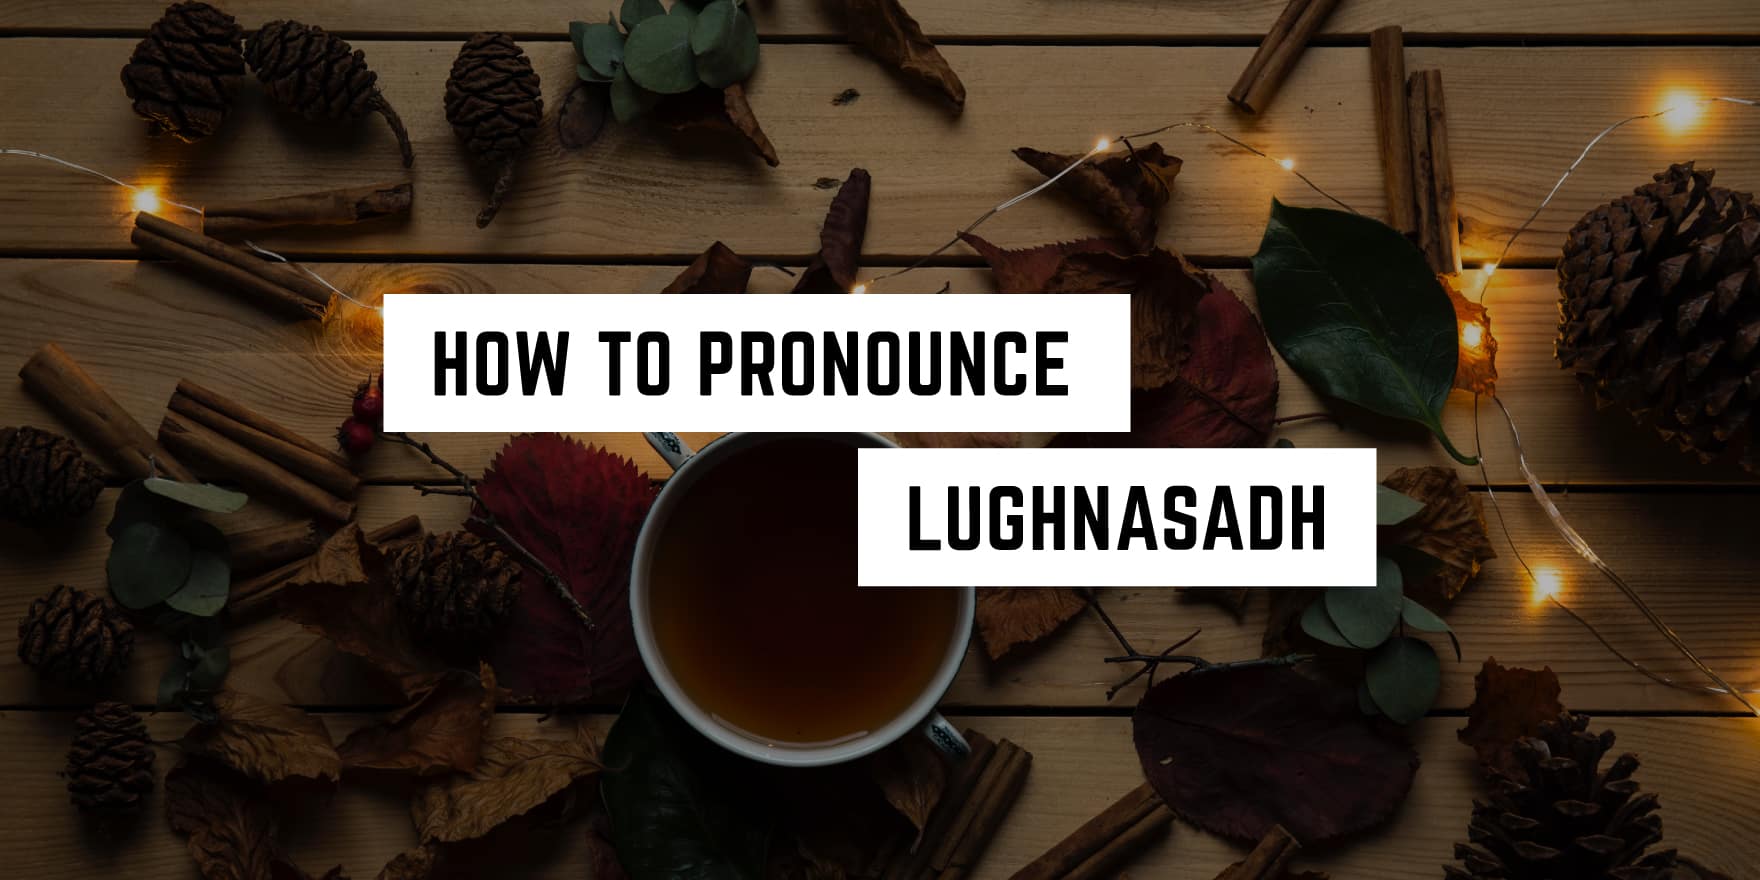 Autumn ambiance with a witchy tutorial: "how to pronounce lughnasadh" surrounded by pine cones, autumn leaves, a cup of tea, and twinkling string lights on a wooden surface